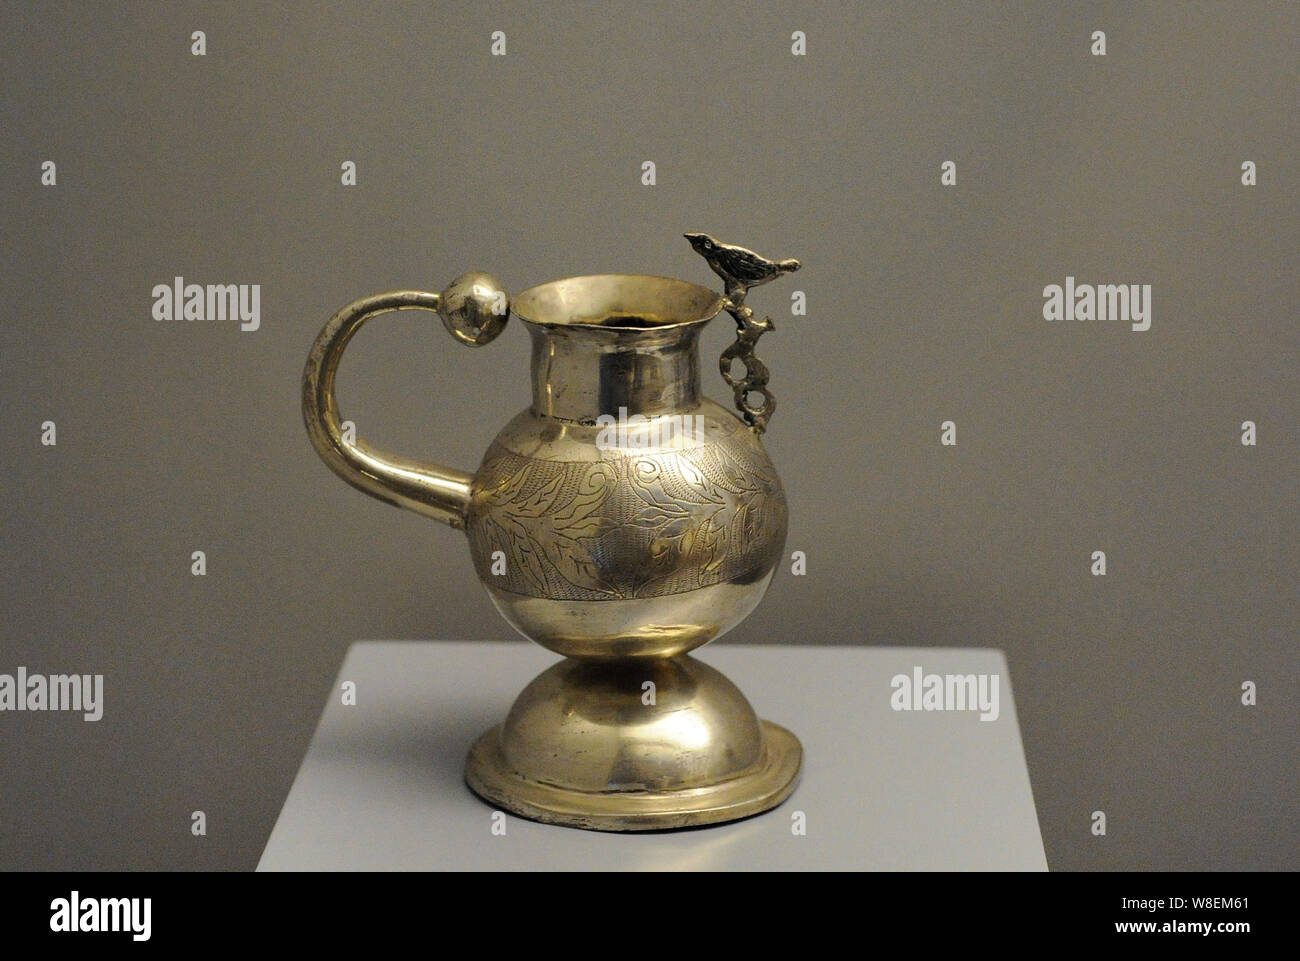 Mate. Silver. 19th century. Argentina. Museum of the Americas. Madrid, Spain. Stock Photo